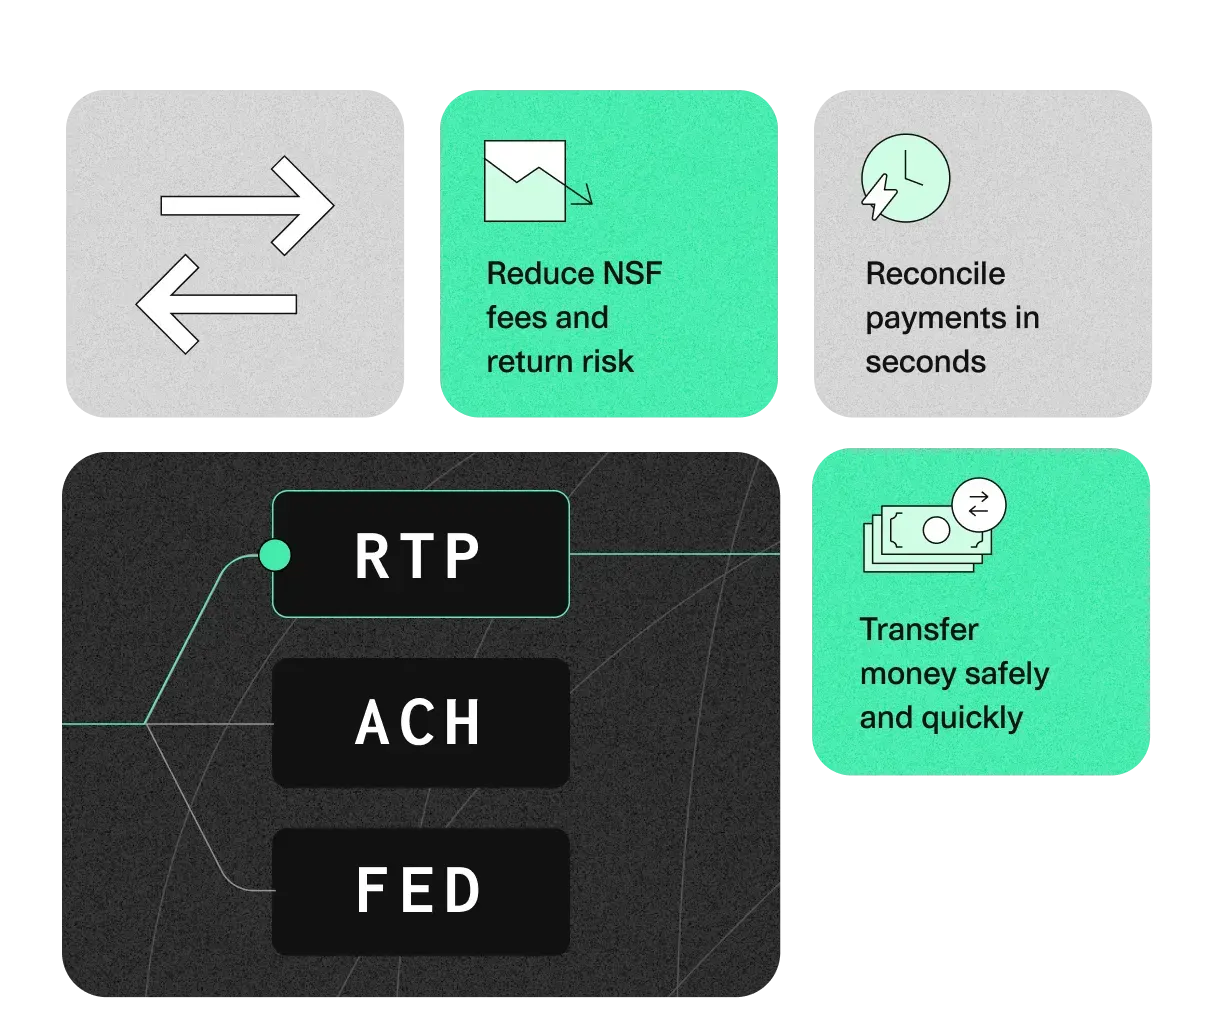 Chart with highlighted RTP, ACH, and FED steps for secure, fast money transfer.